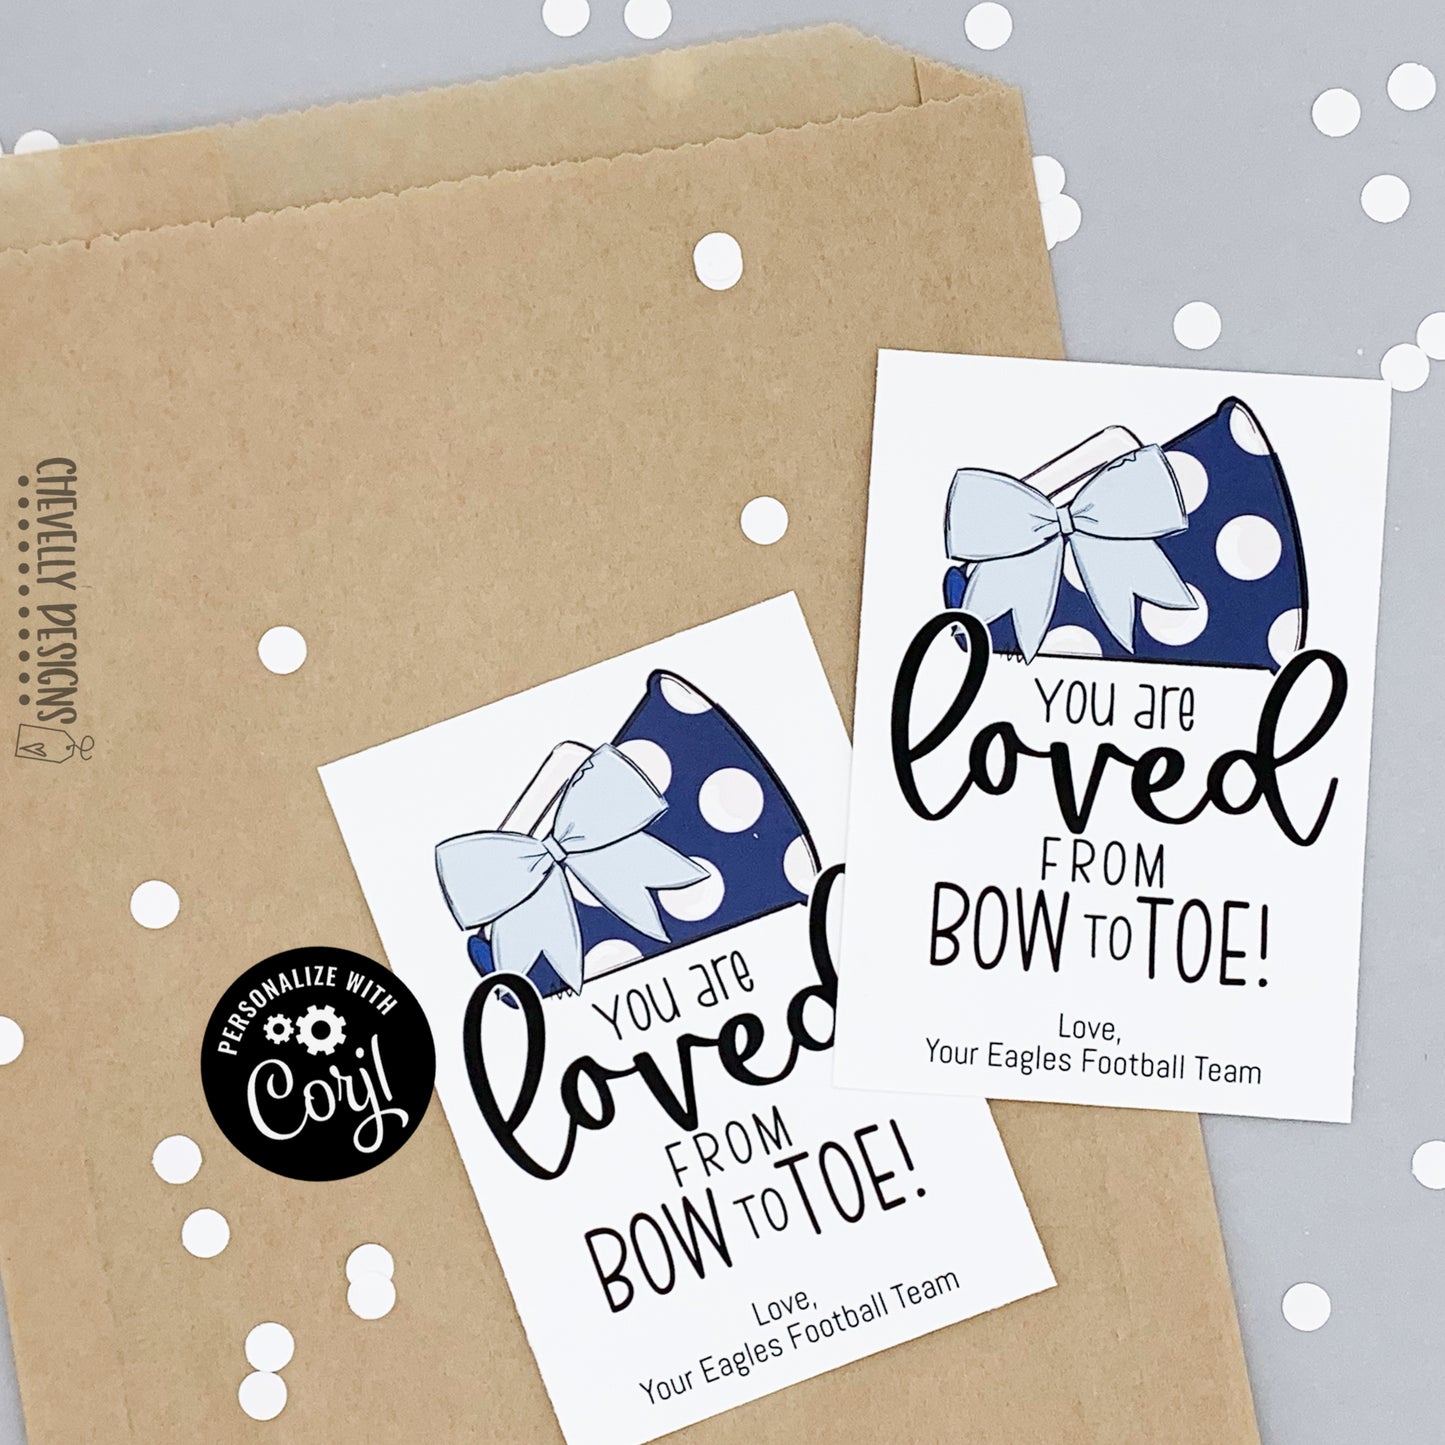 Editable - Gift Tags for Cheerleaders - Silver Gray and Navy Blue Cheer Bow Megaphone - Printable Digital File